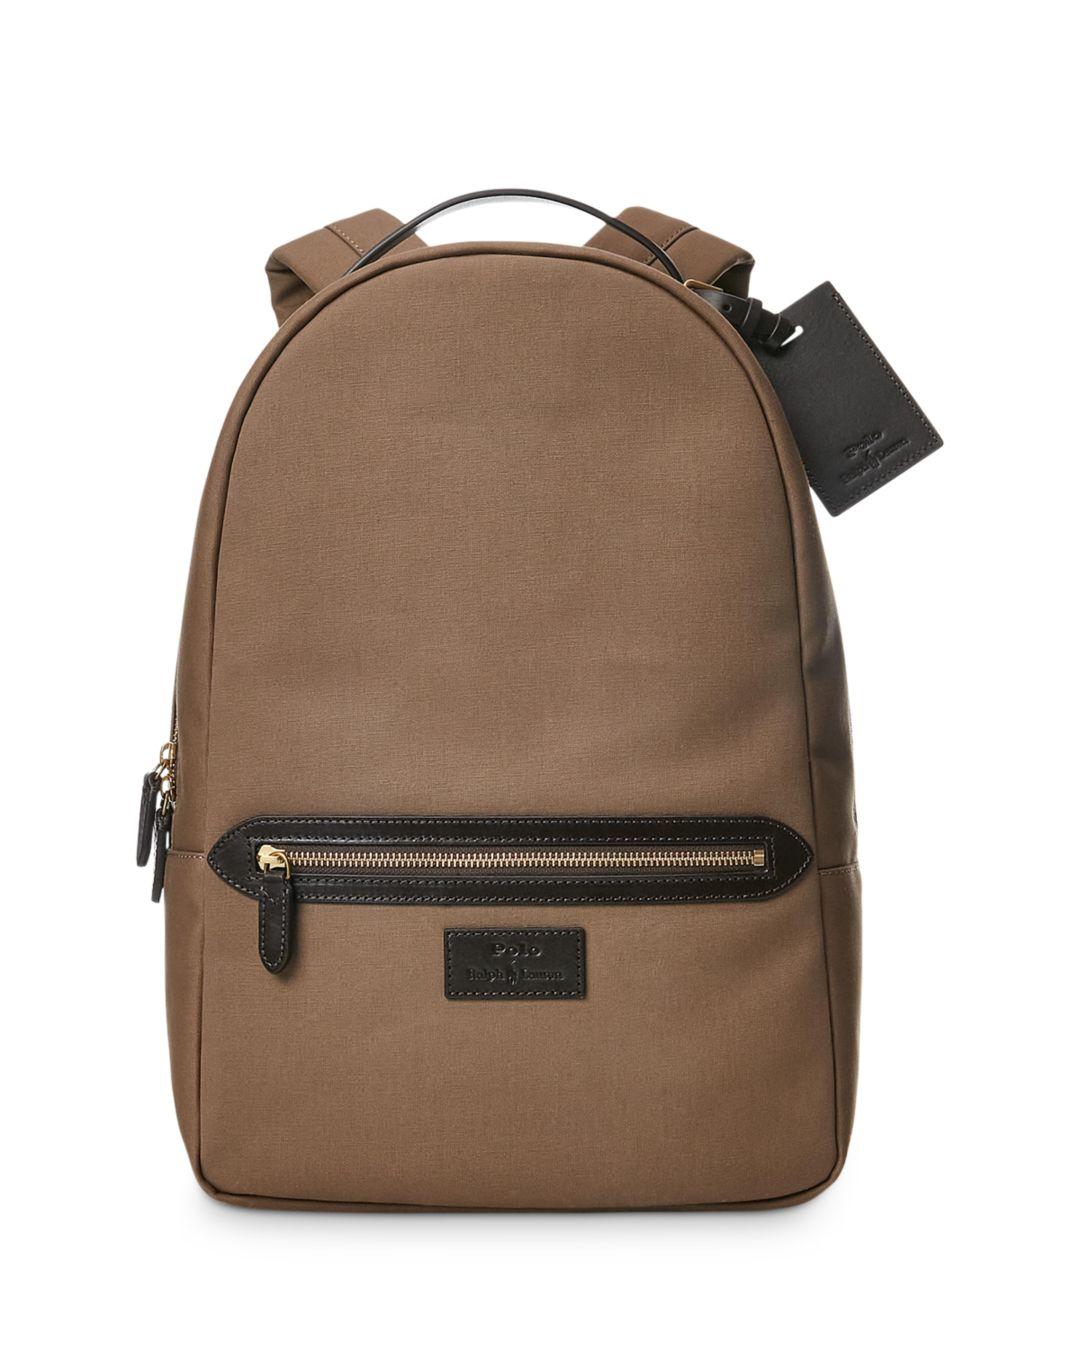 Polo Ralph Lauren Leather Trim Canvas Backpack for Men - Lyst